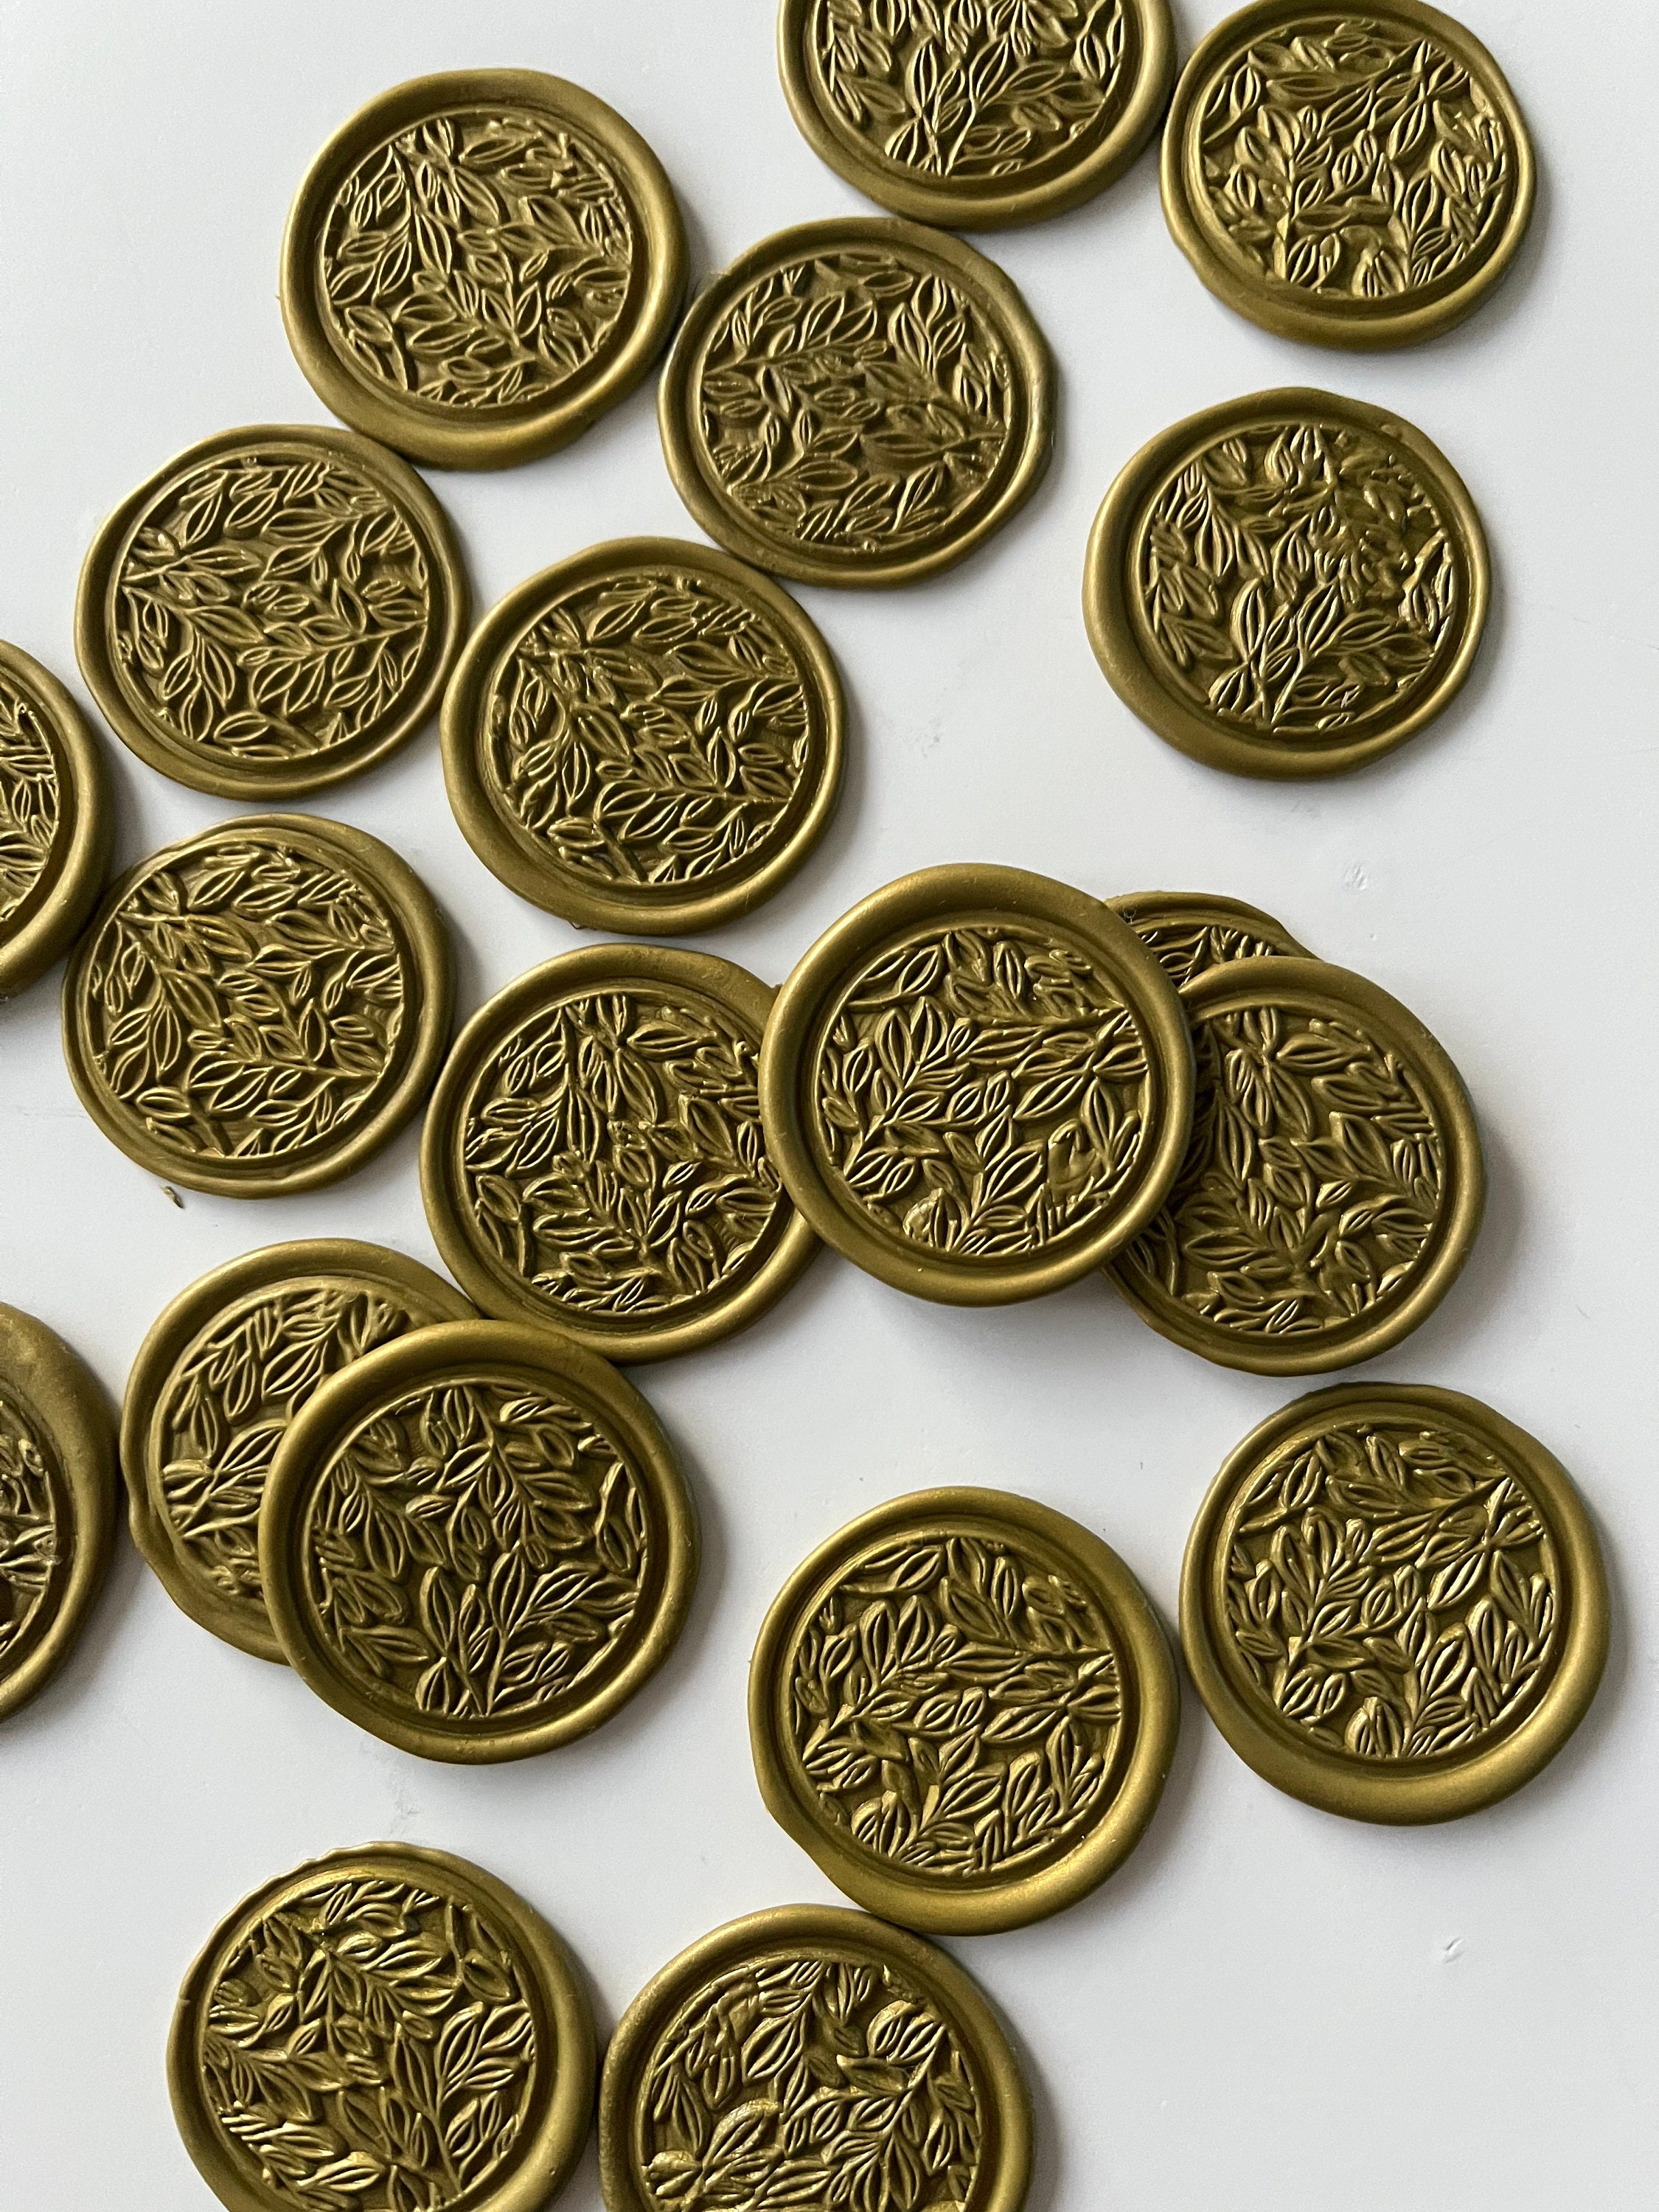 Gold Leaf Flakes for Wax Seals and Sealing Wax 